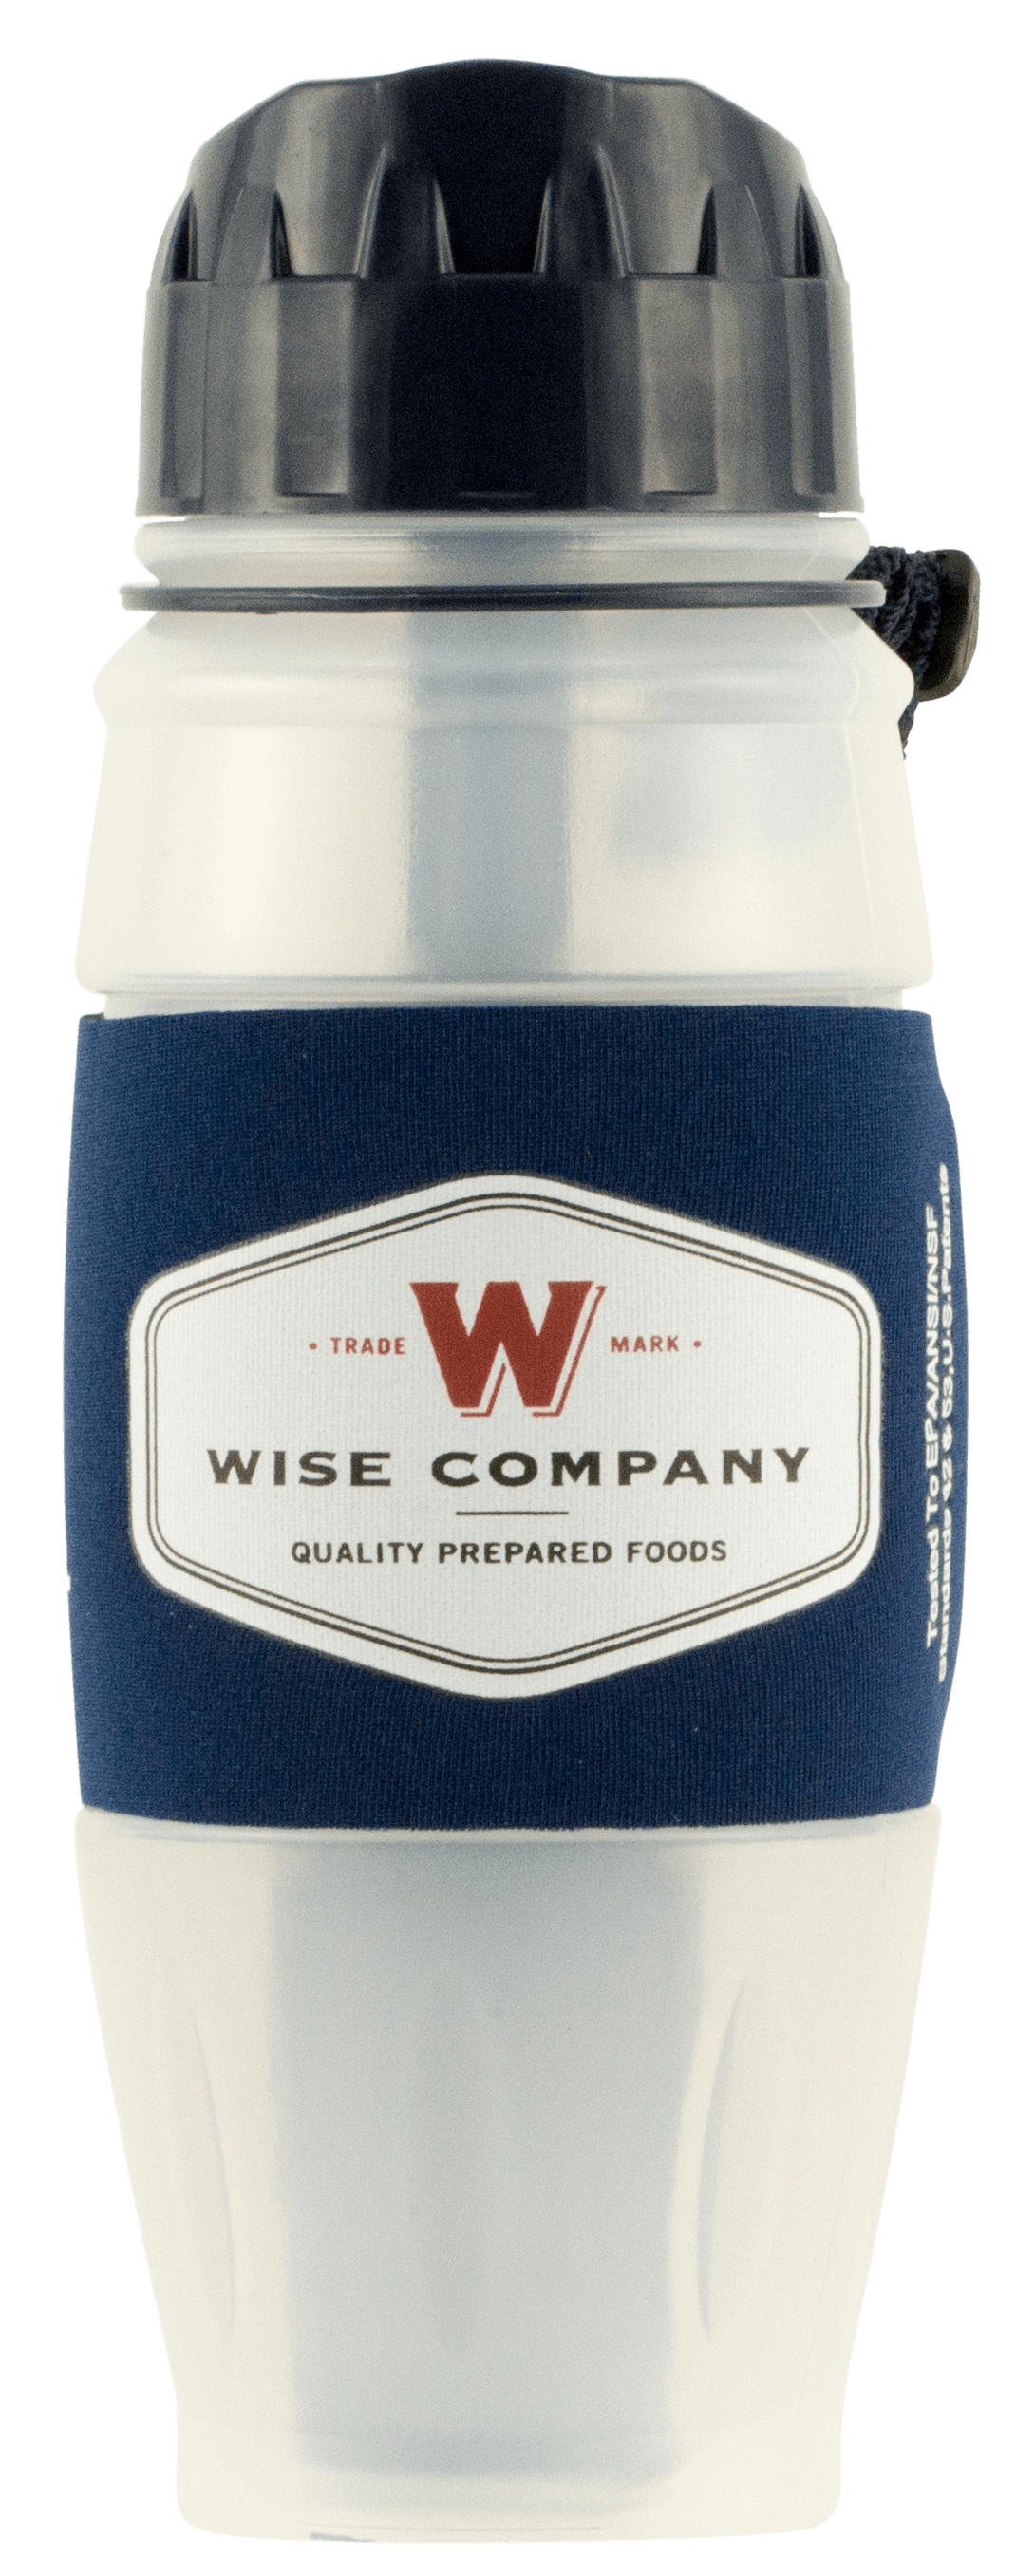 Wise Foods Wise Foods Water Filtration Bottle, Wise Rw08000 Water Filtratin Bottle 28oz Accessories